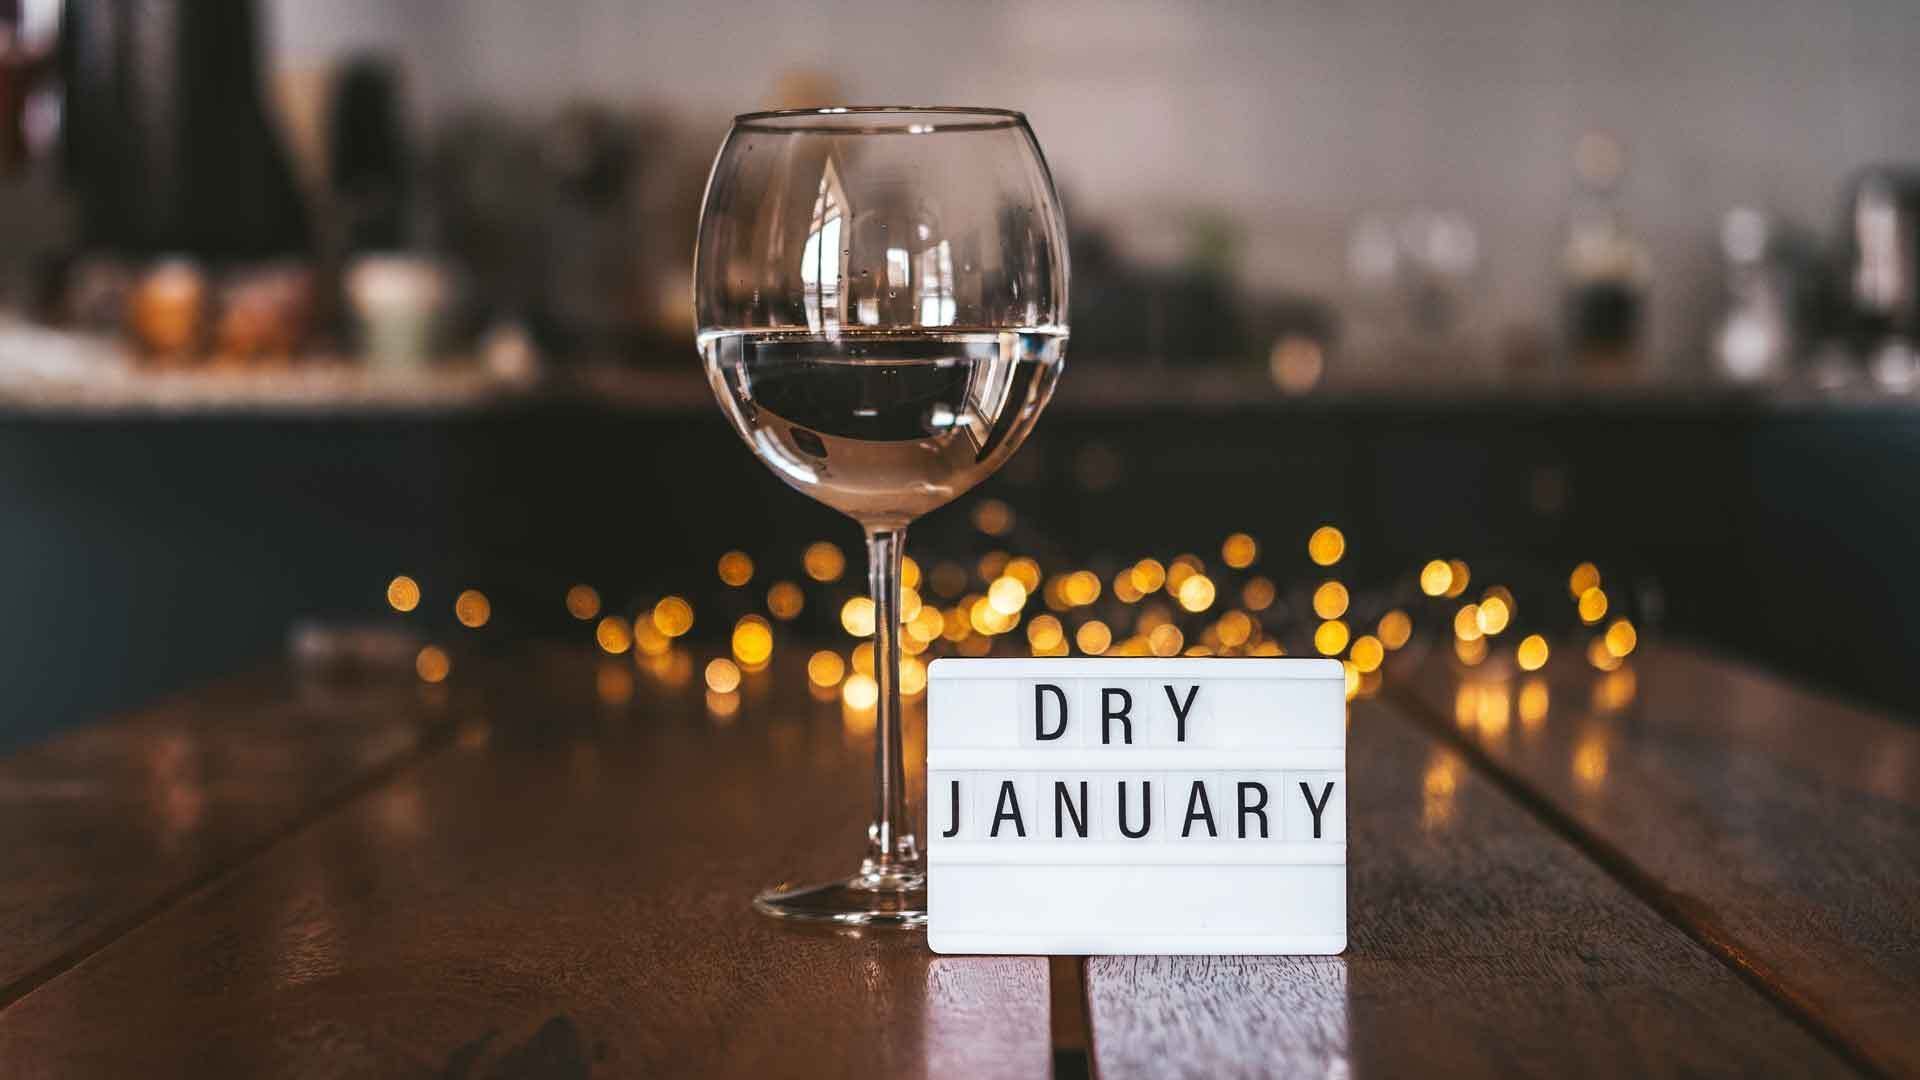 According to studies: That's what Dry January really brings!